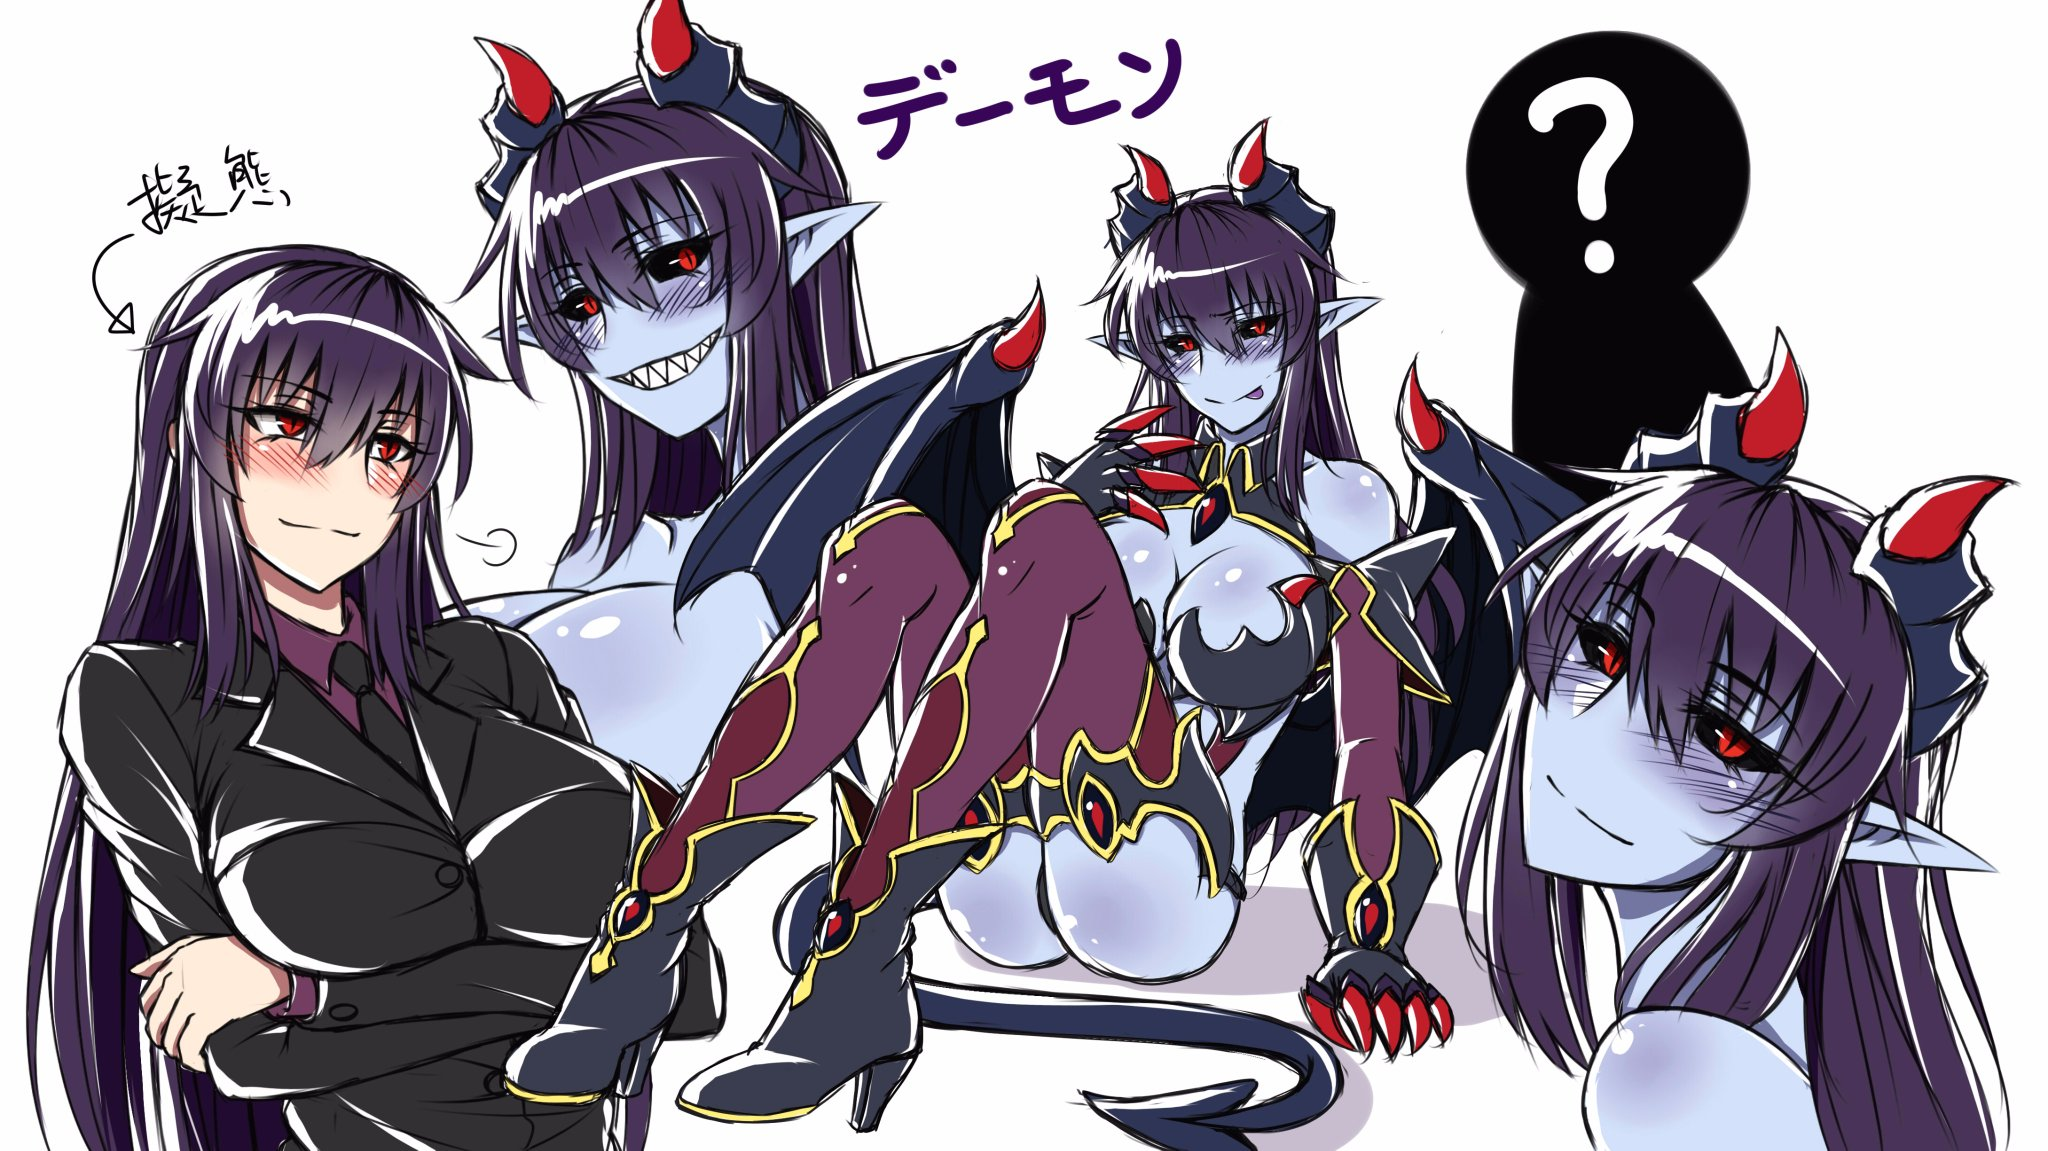 So if a monster girl manages to turn you into a incubus